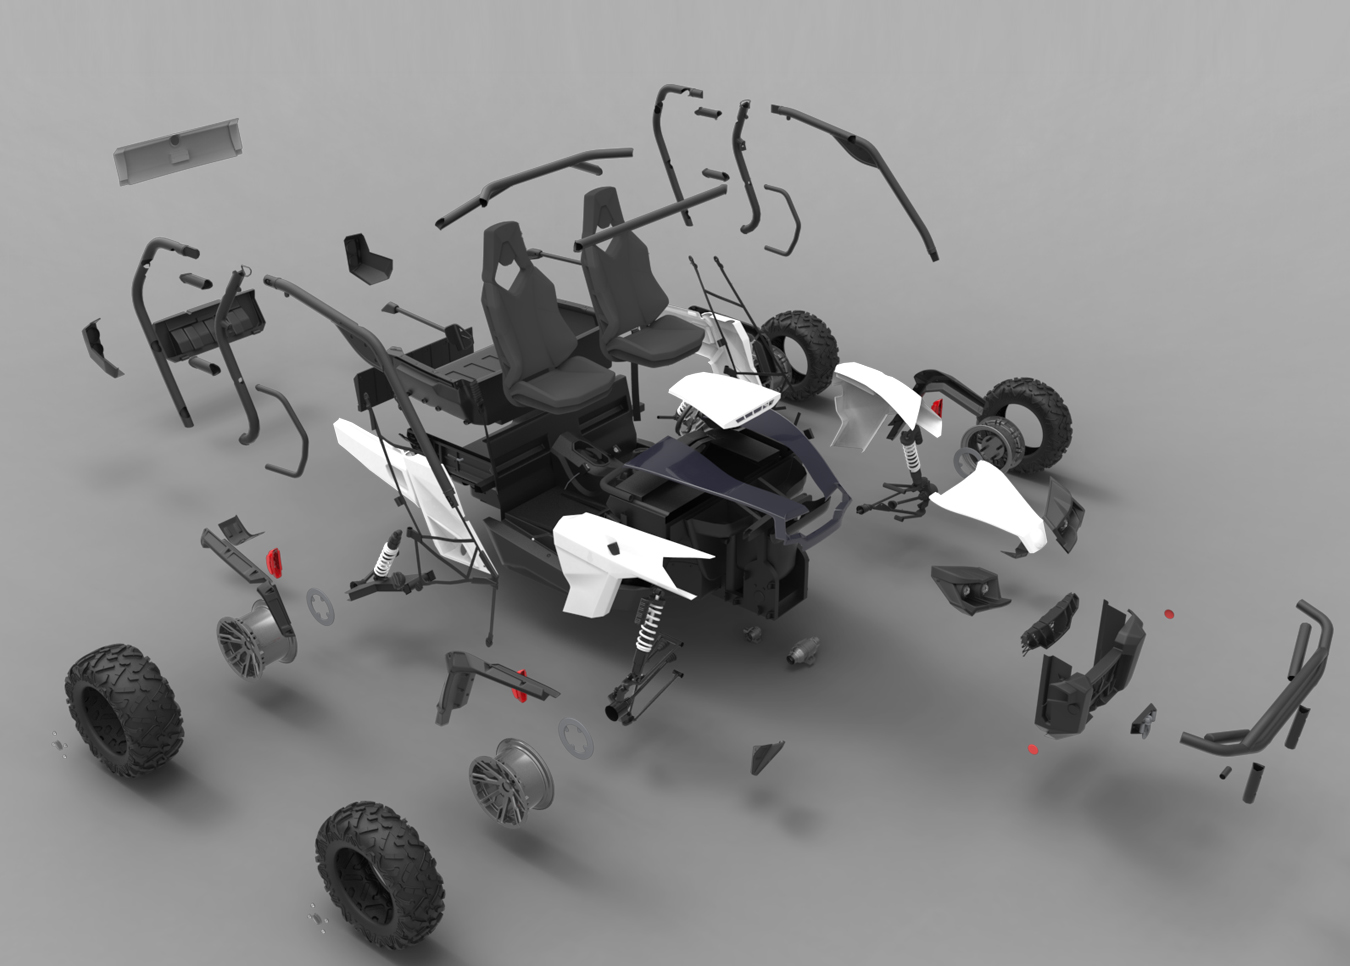 Exploded view of UTV parts from CAD models